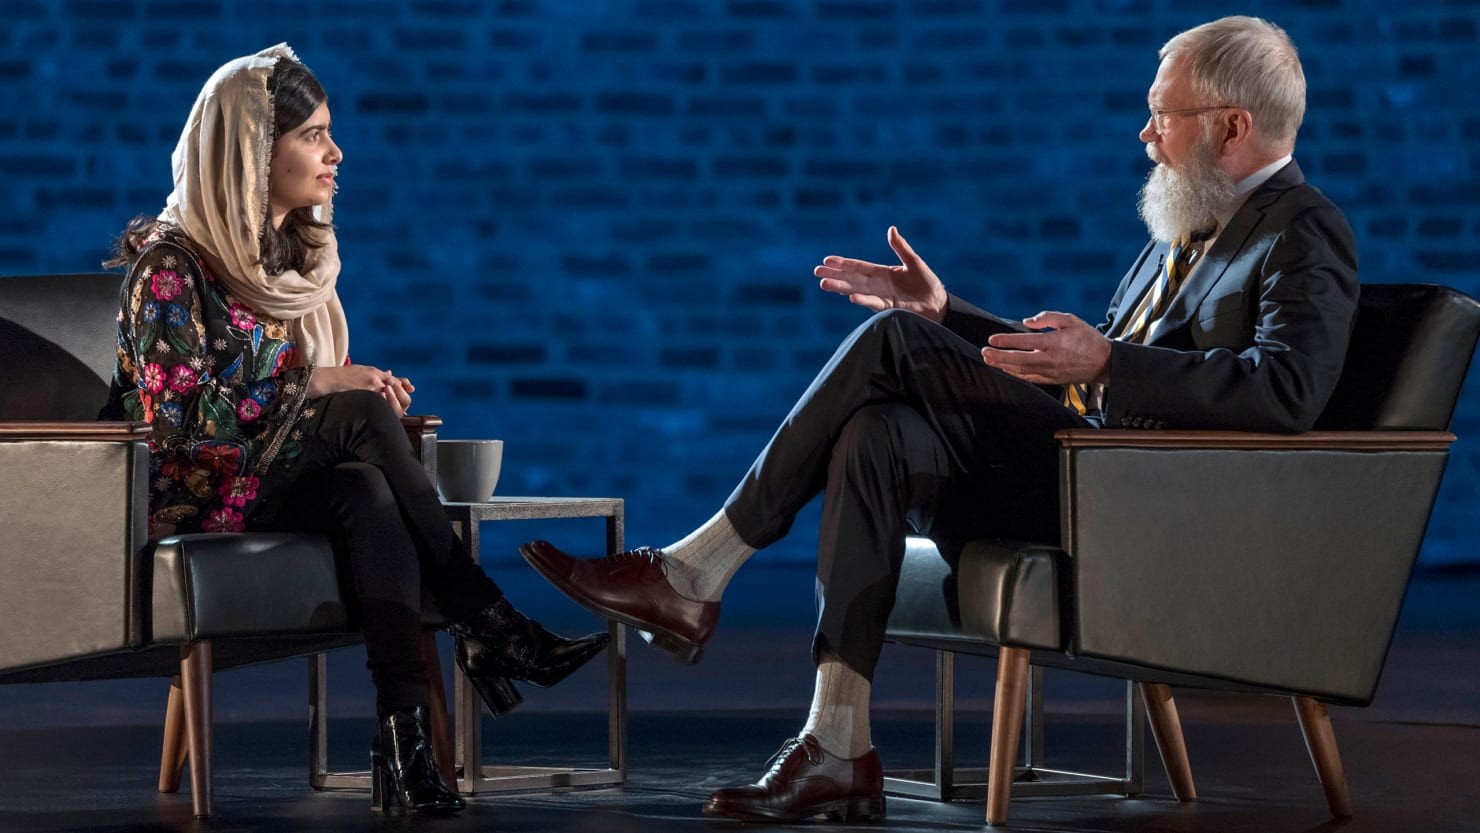 Malala Yousafzai Sounds Off on Trump to Letterman: ‘I’m a Muslim,’ Does He Want to Ban Me?